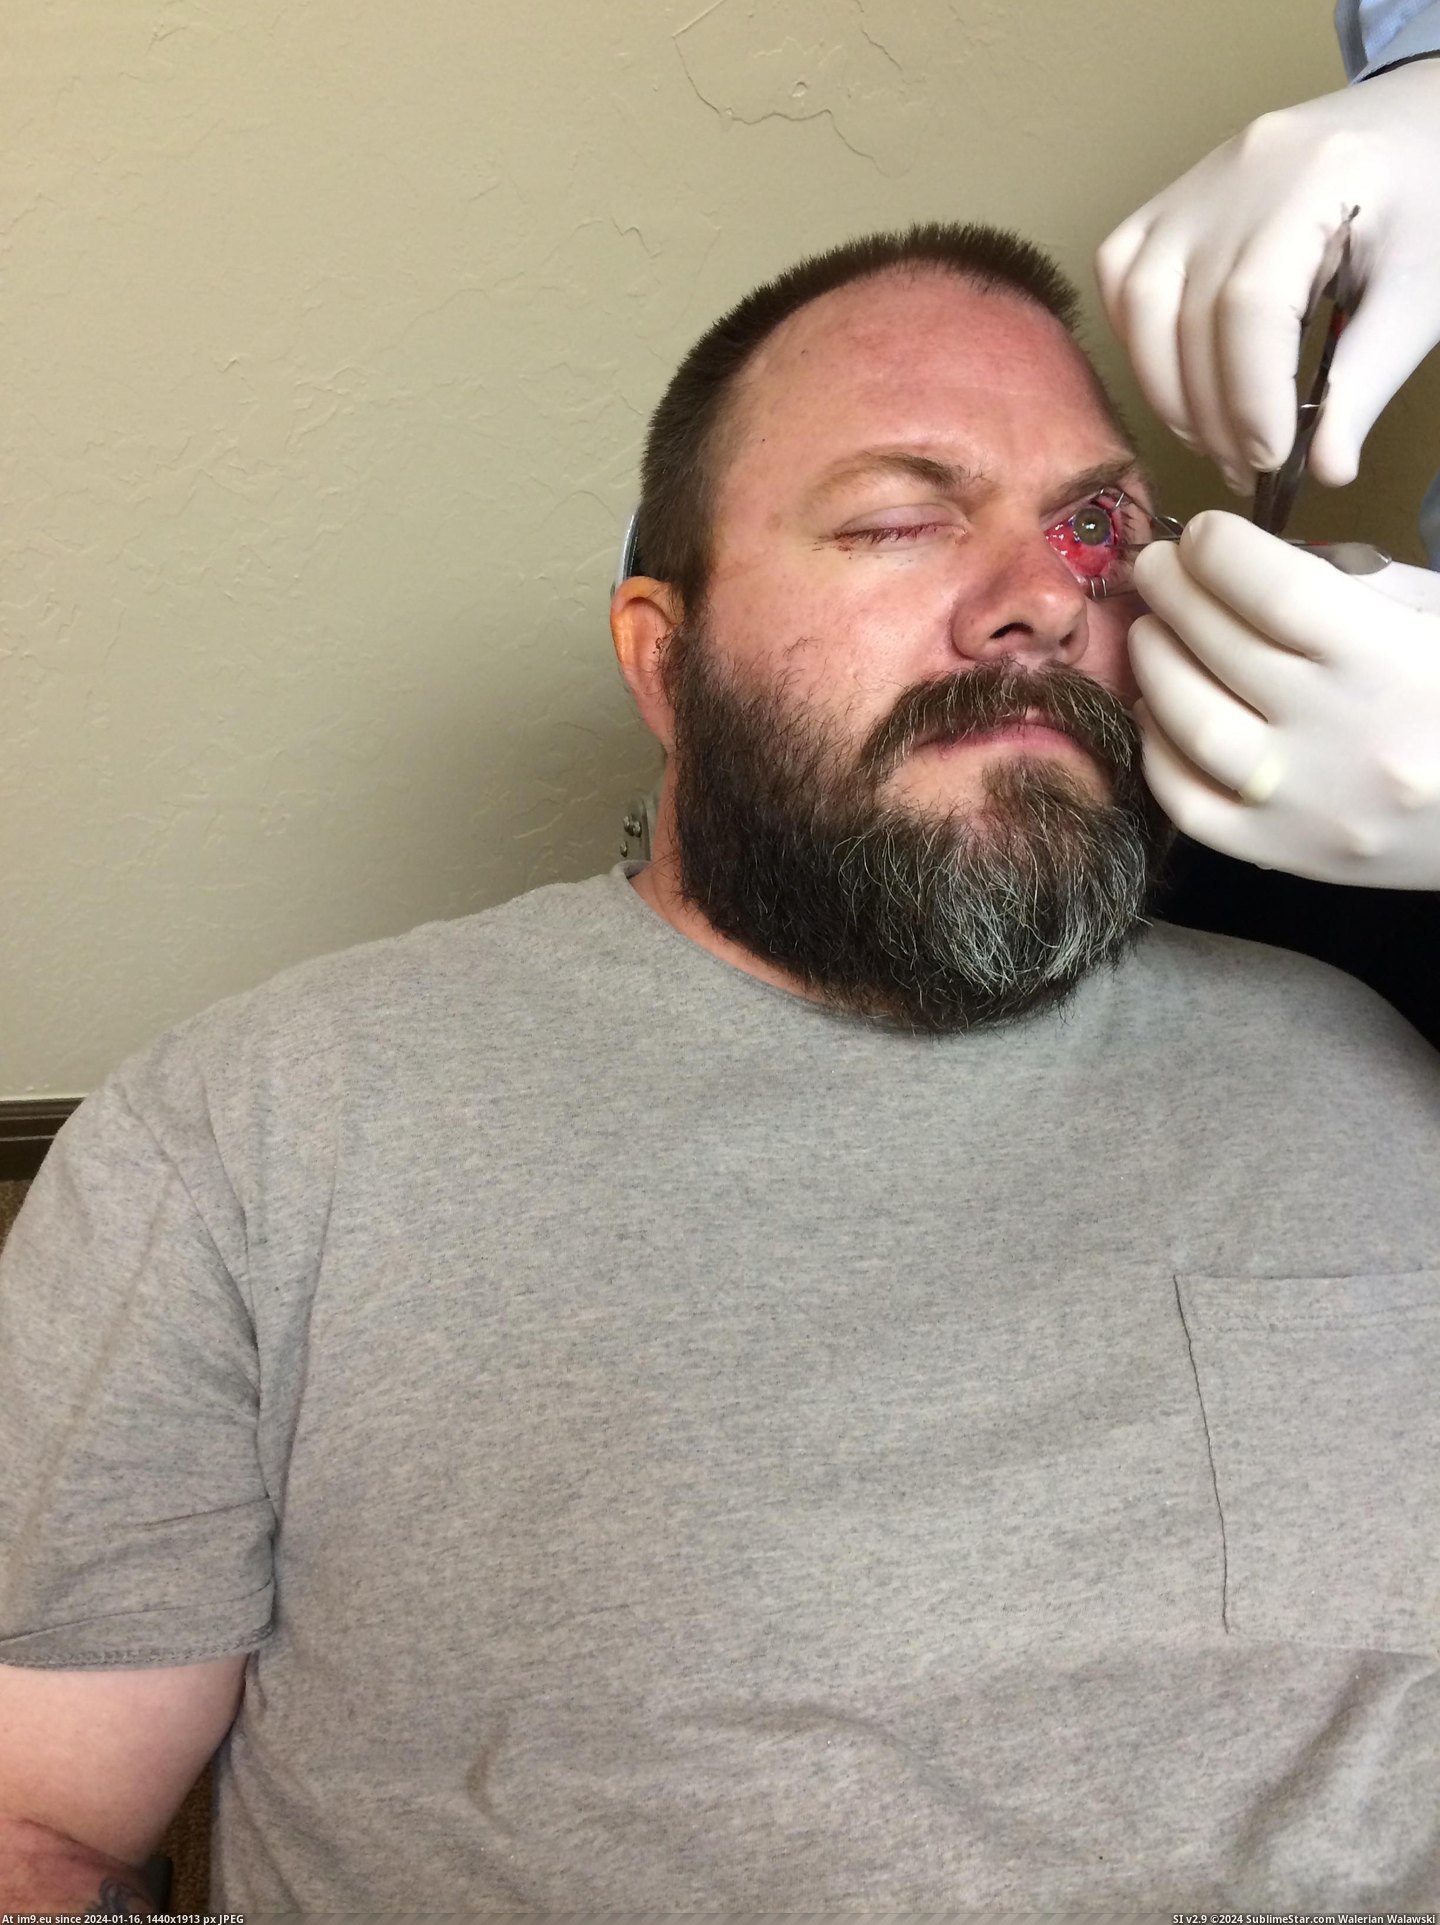 #Wtf #Surgery #Eye [Wtf] Had Eye Surgery Yesterday. 2 Pic. (Image of album My r/WTF favs))